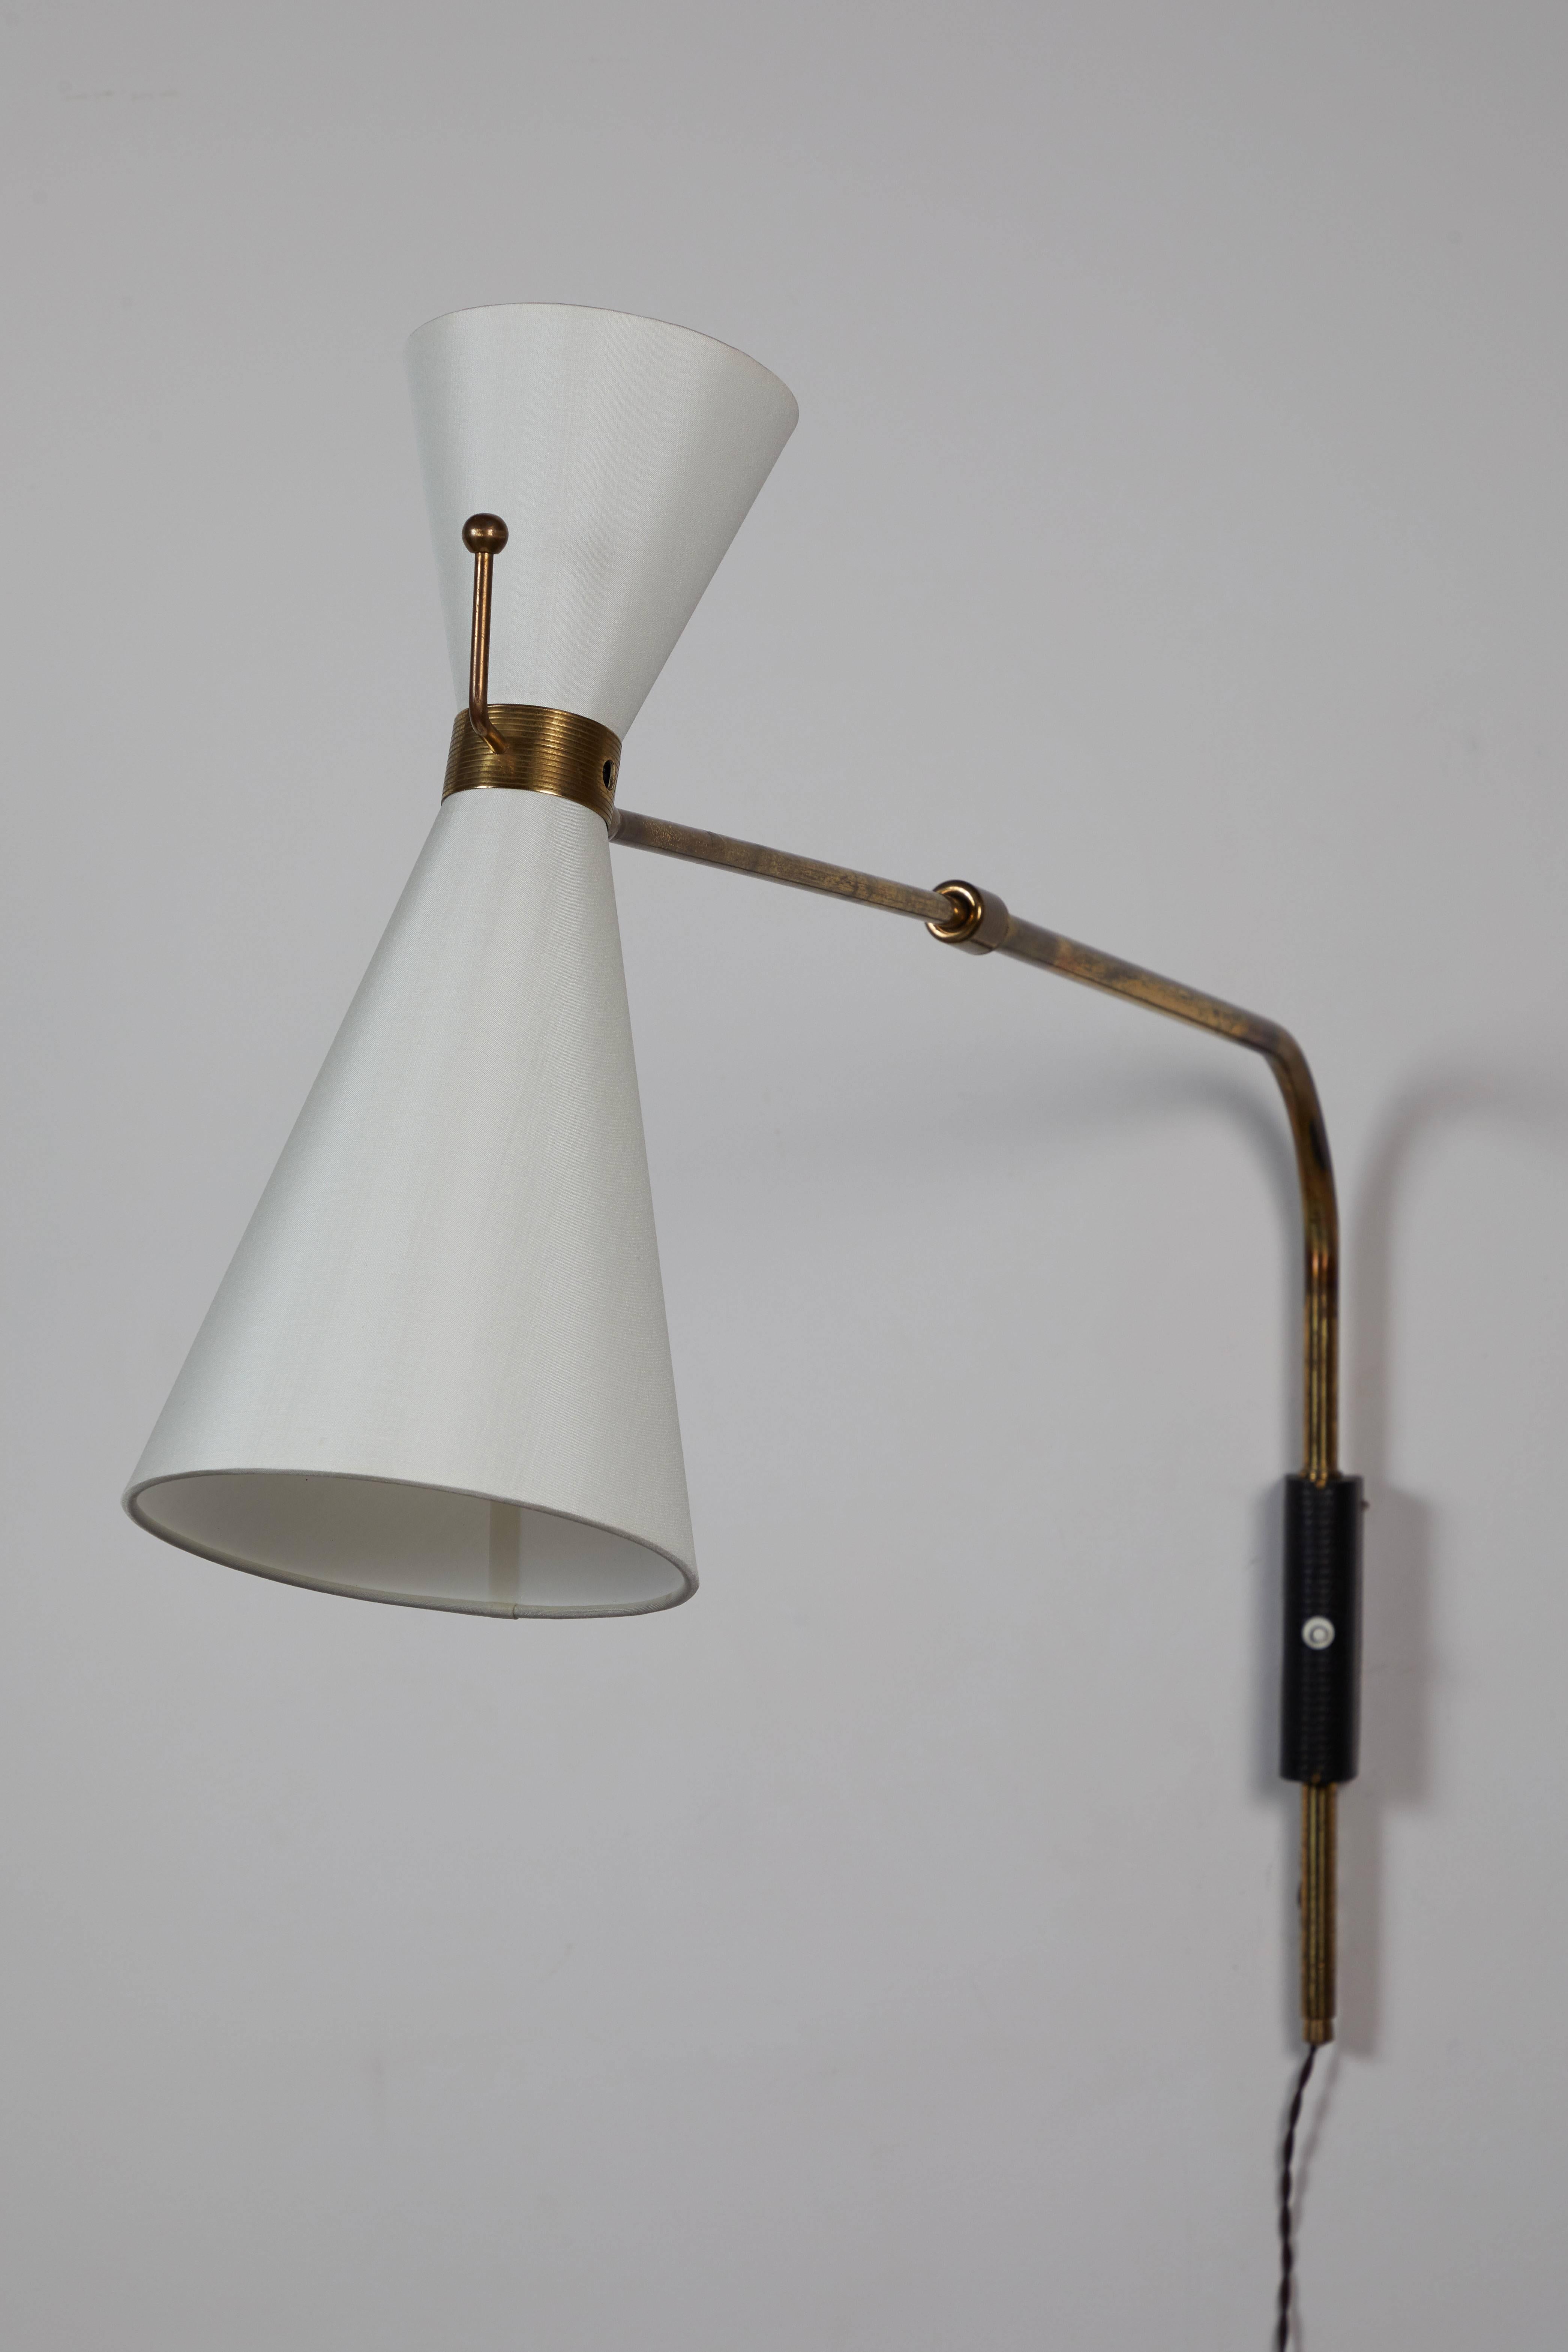 Mid-20th Century French Wall Light by Robert Mathieu